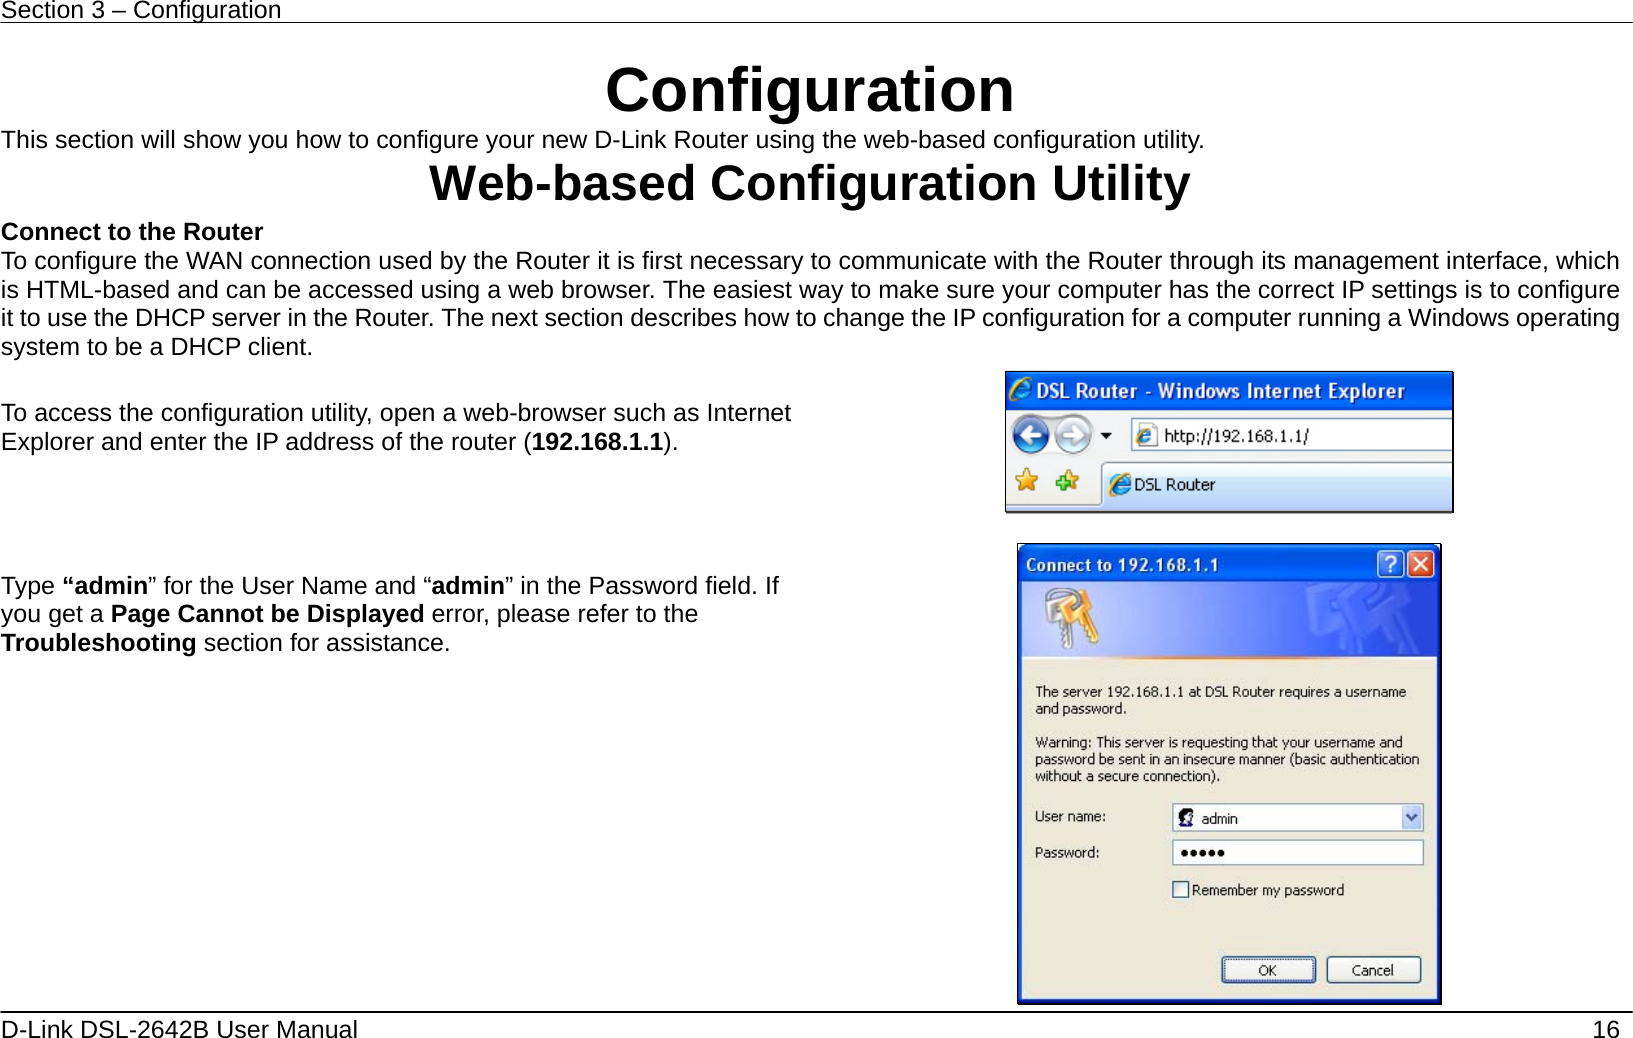 Section 3 – Configuration   D-Link DSL-2642B User Manual    16 Configuration This section will show you how to configure your new D-Link Router using the web-based configuration utility. Web-based Configuration Utility Connect to the Router   To configure the WAN connection used by the Router it is first necessary to communicate with the Router through its management interface, which is HTML-based and can be accessed using a web browser. The easiest way to make sure your computer has the correct IP settings is to configure it to use the DHCP server in the Router. The next section describes how to change the IP configuration for a computer running a Windows operating system to be a DHCP client.  To access the configuration utility, open a web-browser such as Internet Explorer and enter the IP address of the router (192.168.1.1).      Type “admin” for the User Name and “admin” in the Password field. If you get a Page Cannot be Displayed error, please refer to the Troubleshooting section for assistance.  